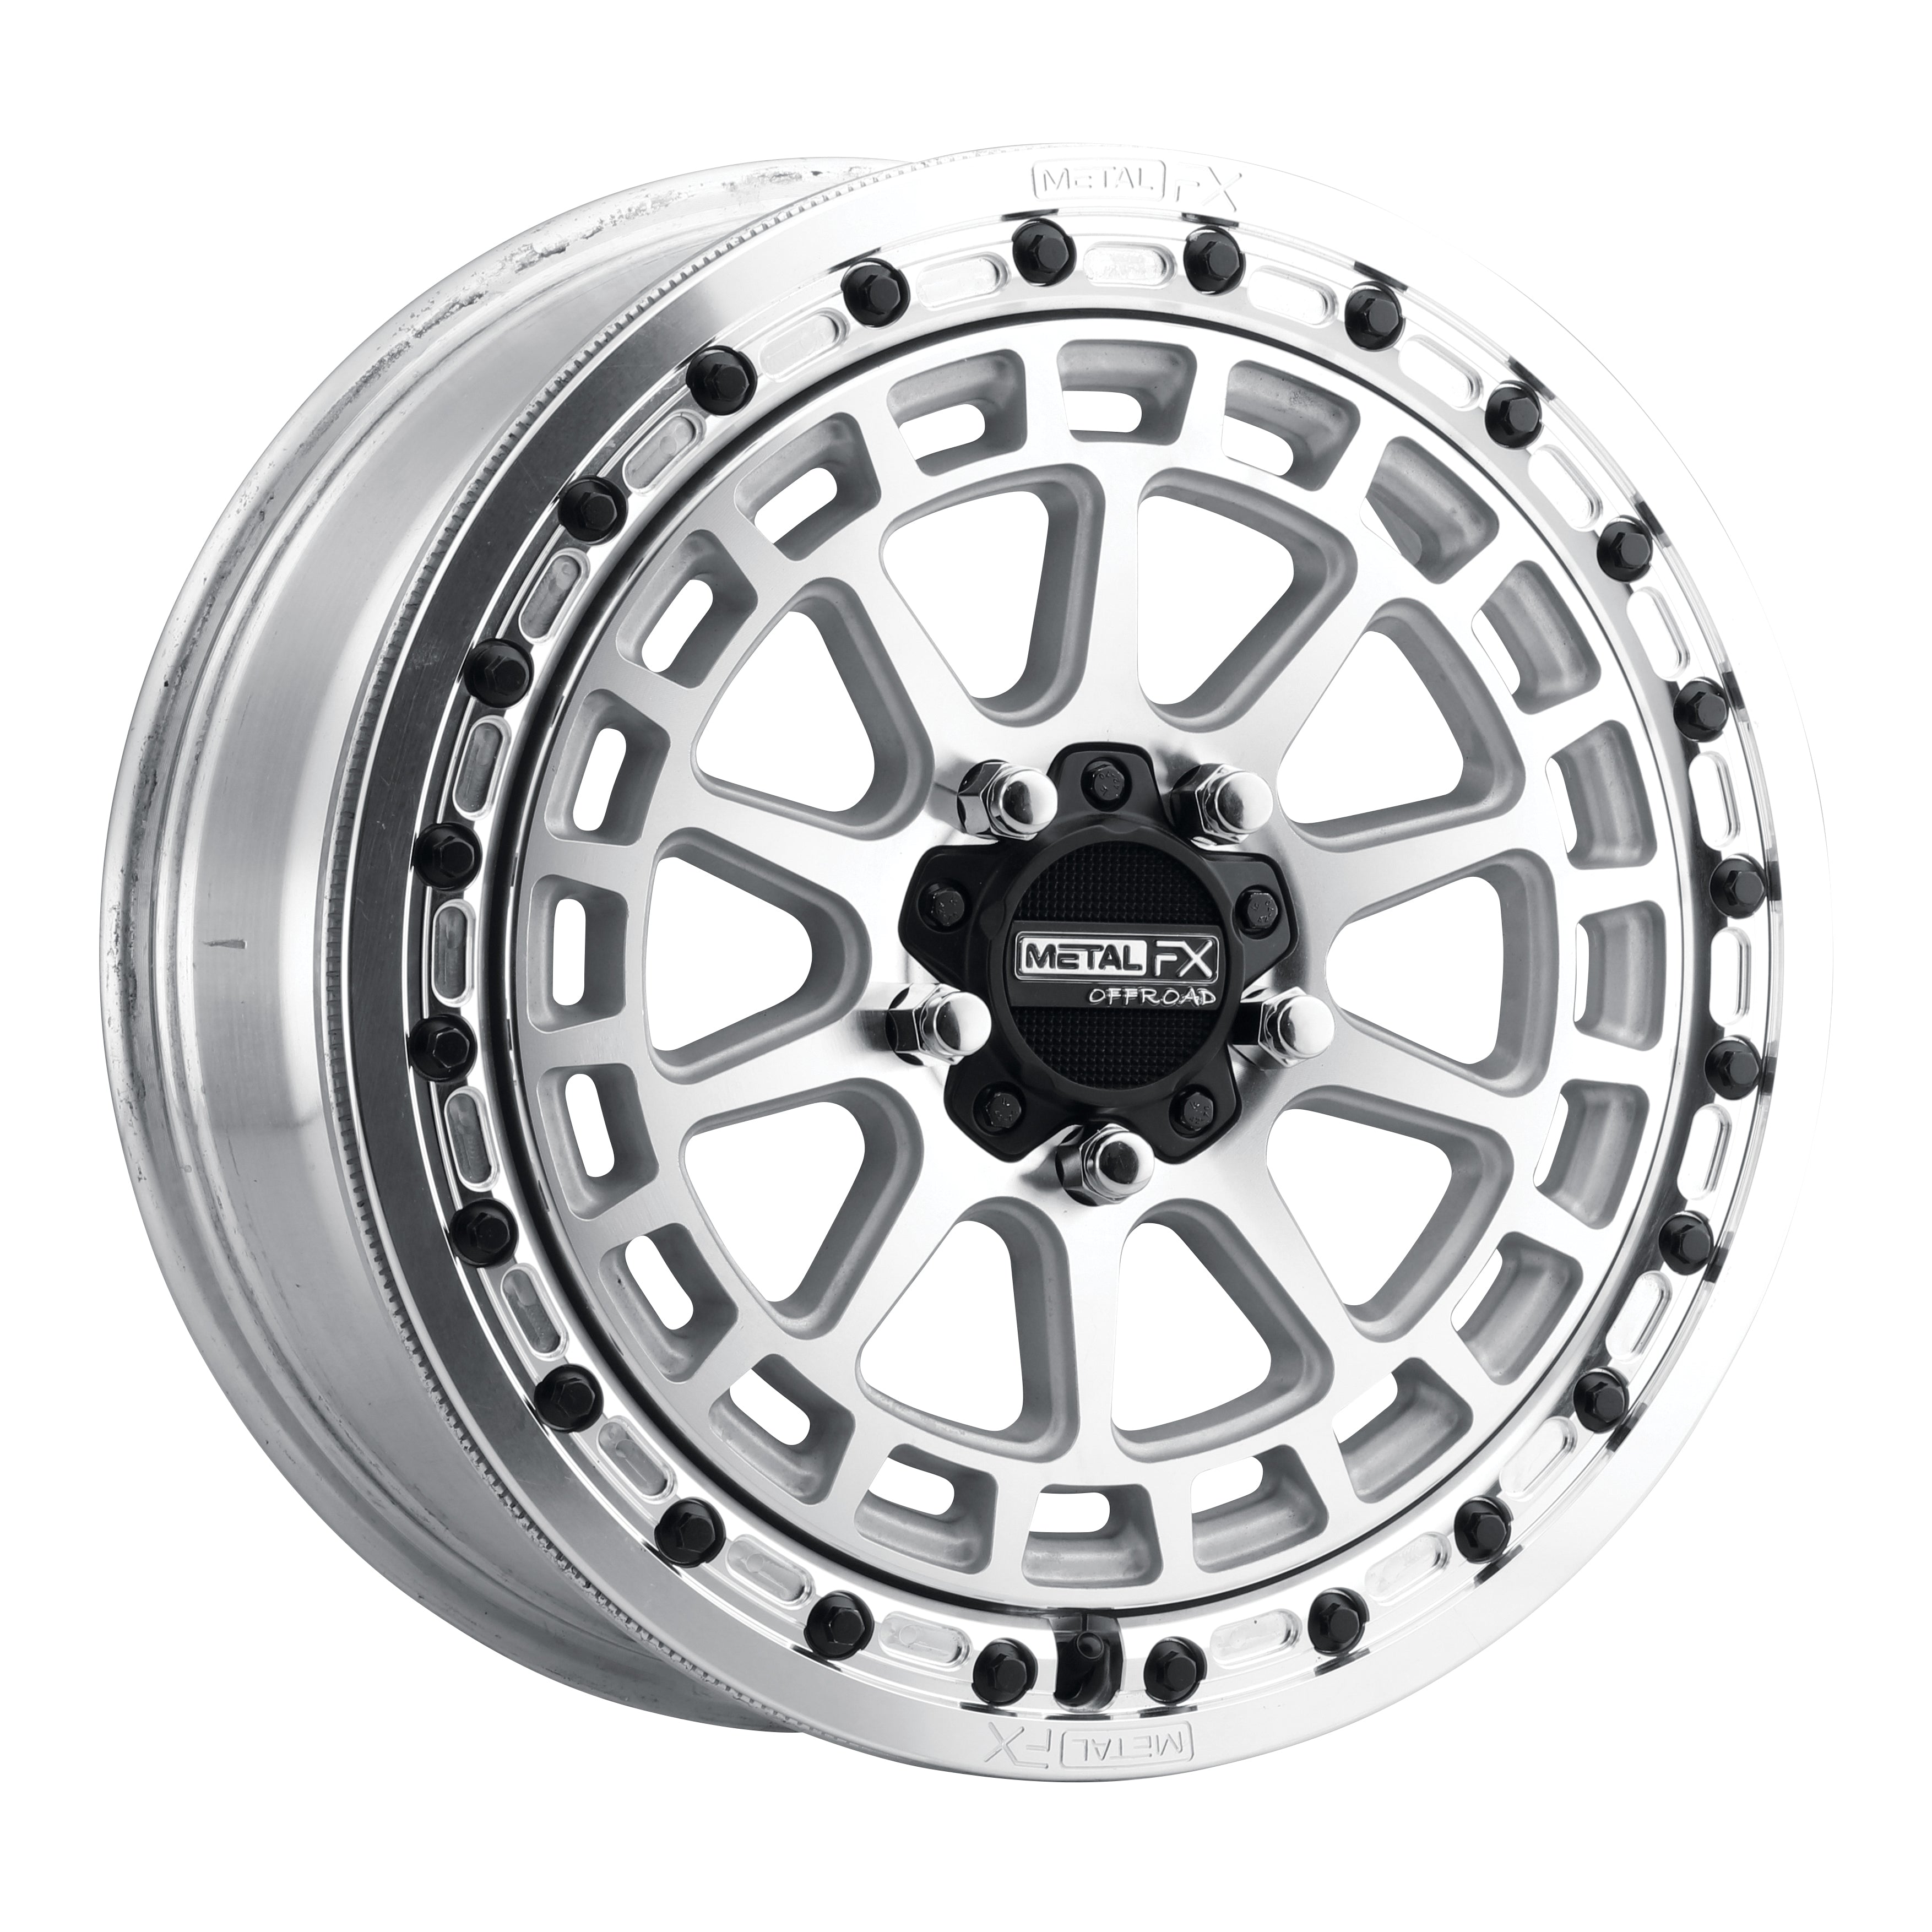 KMC Wheels, Street, Sport, and Offroad Wheels for most Applications